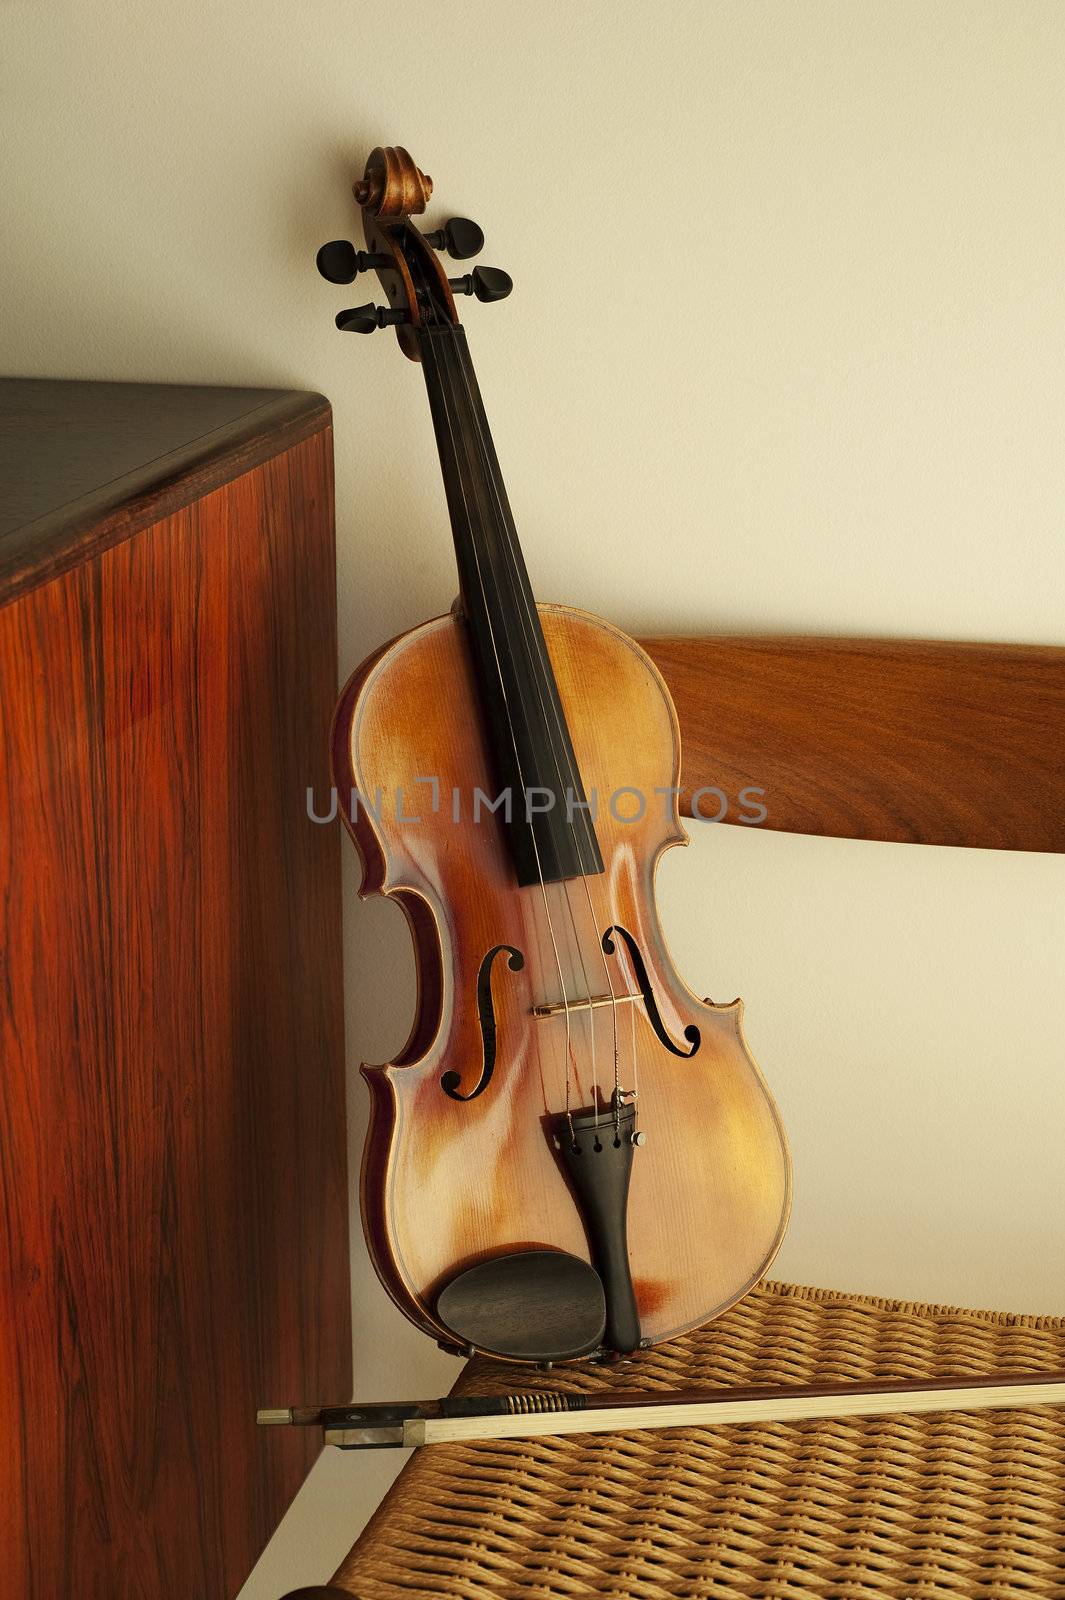 Violin leaning against rope chair